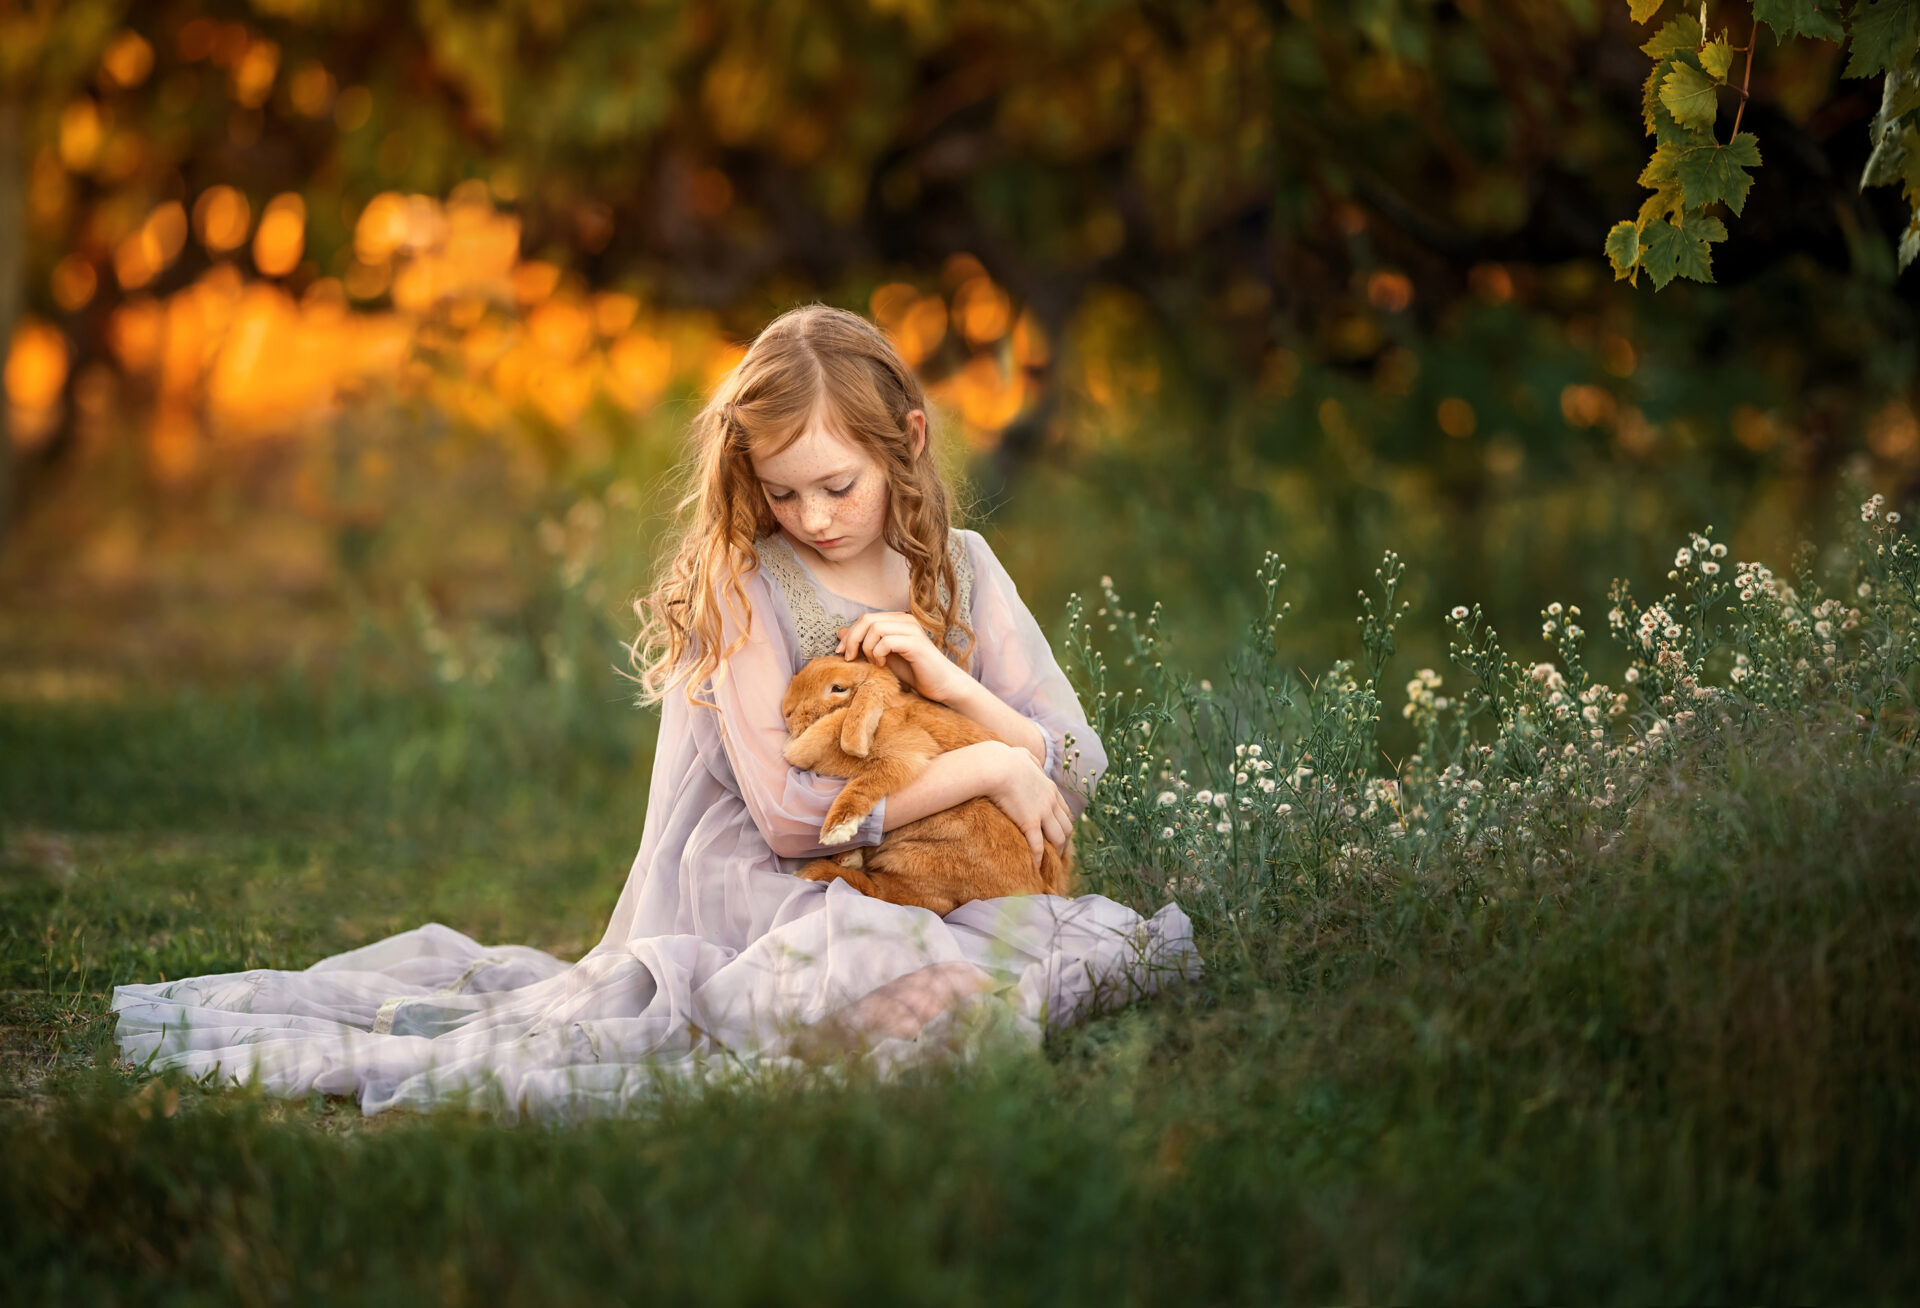 Perth Children Portraits - 9 year old girl with her bunny during outdoor photoshoot